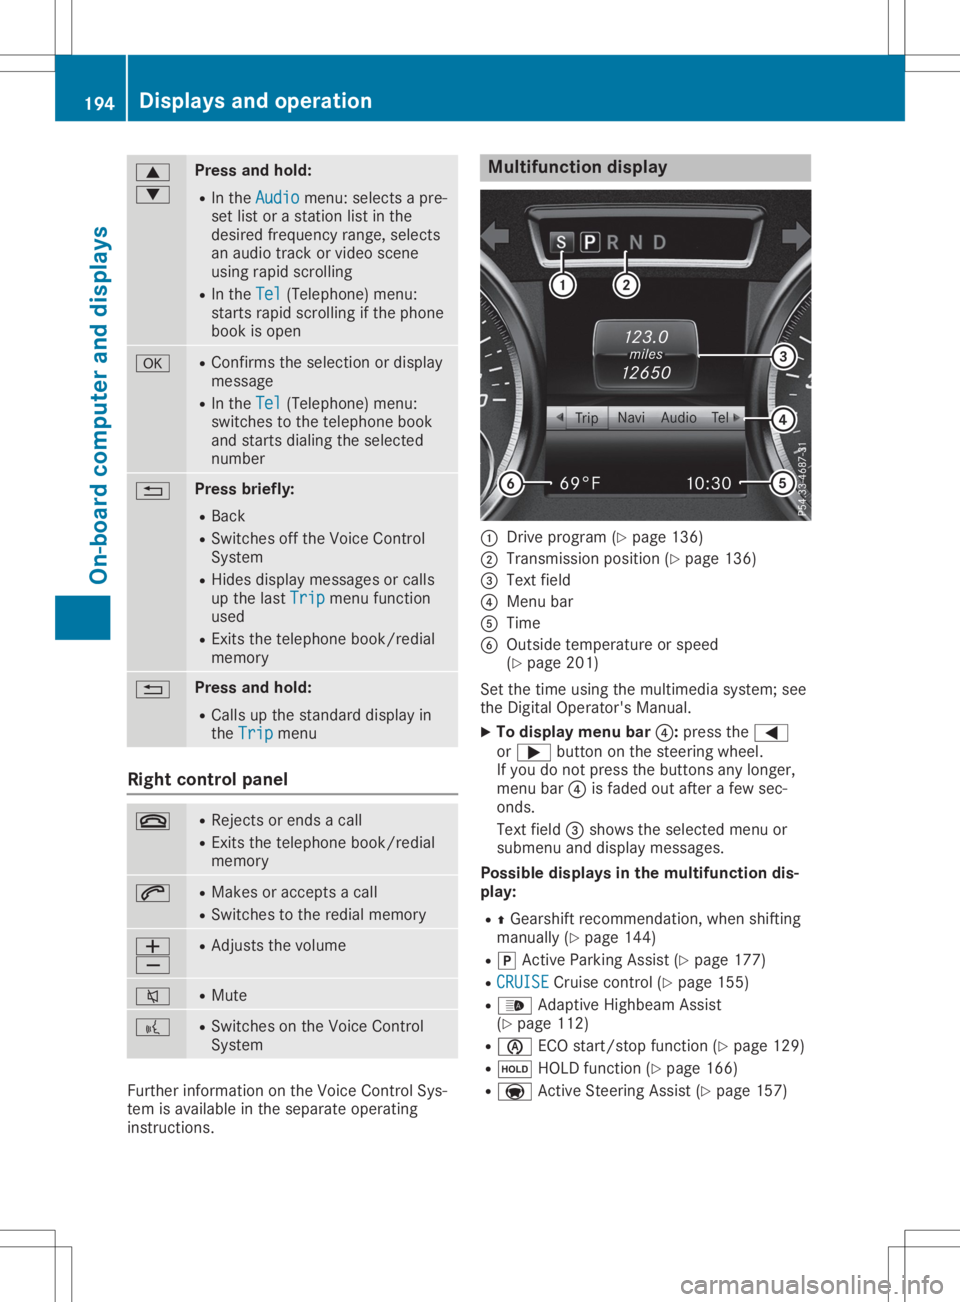 MERCEDES-BENZ SL CLASS 2020  Owners Manual 0063
0064 Press
andhold:
R In the Audio Audio
menu: selects apre-
set listorastation listinthe
desired frequency range,selects
an audio trackorvideo scene
using rapidscrolling
R In the Tel Tel
(Teleph